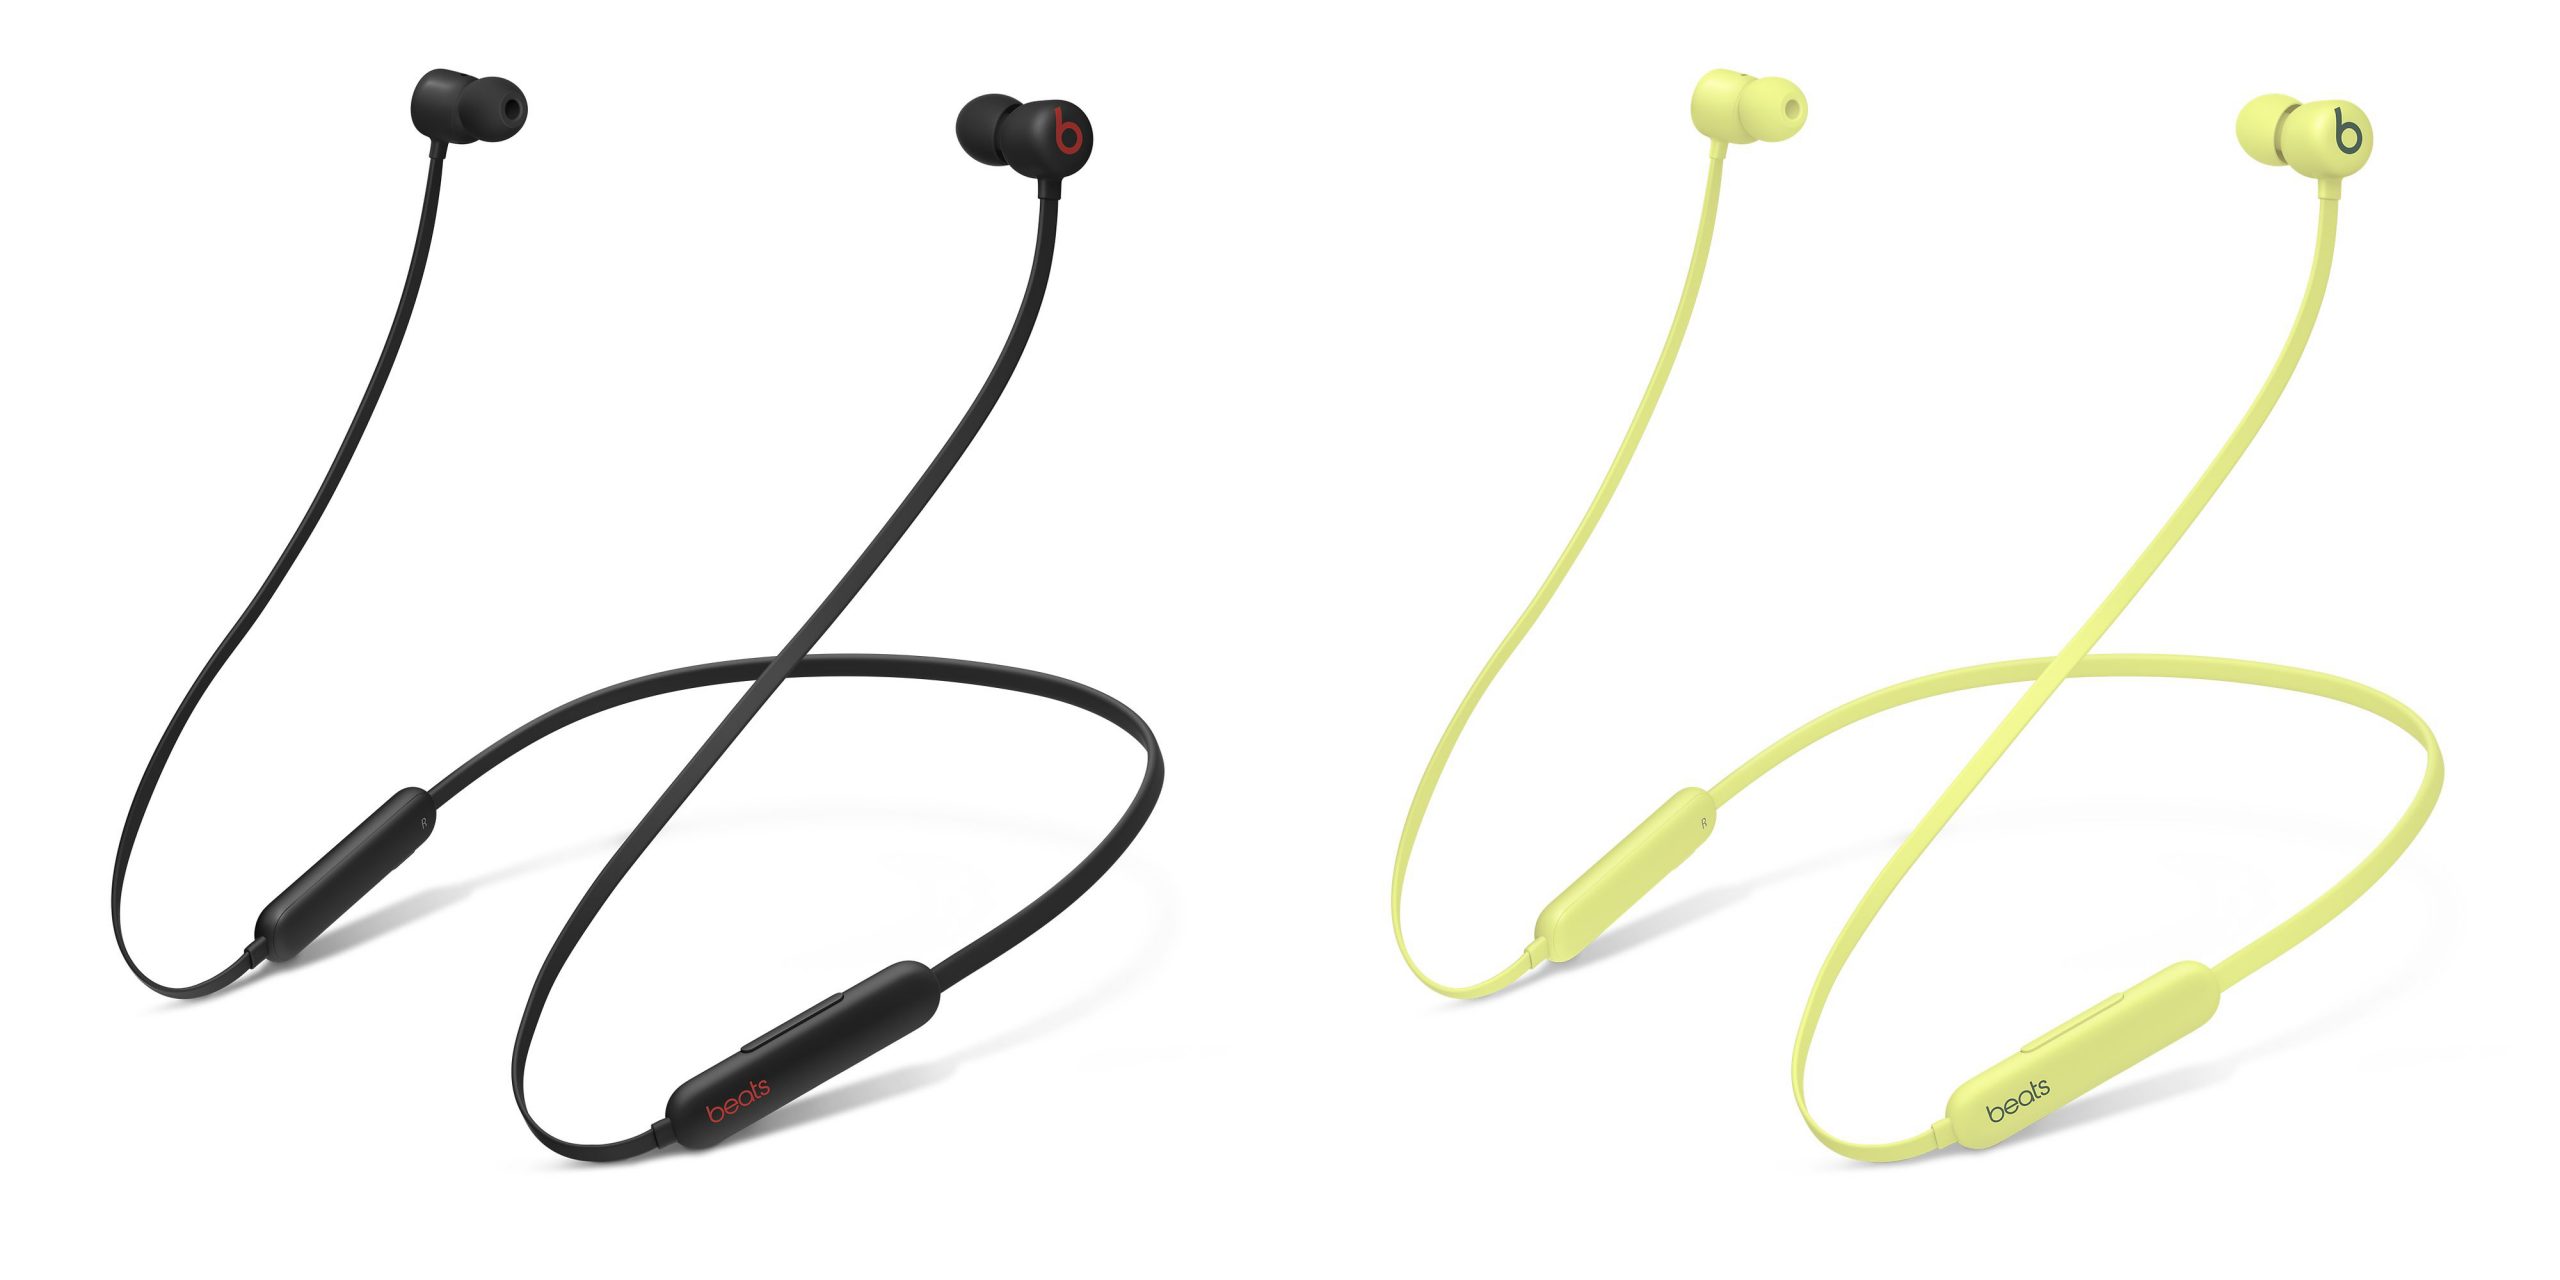 Apple’s new Beats Flex wireless earbuds are currently under $40